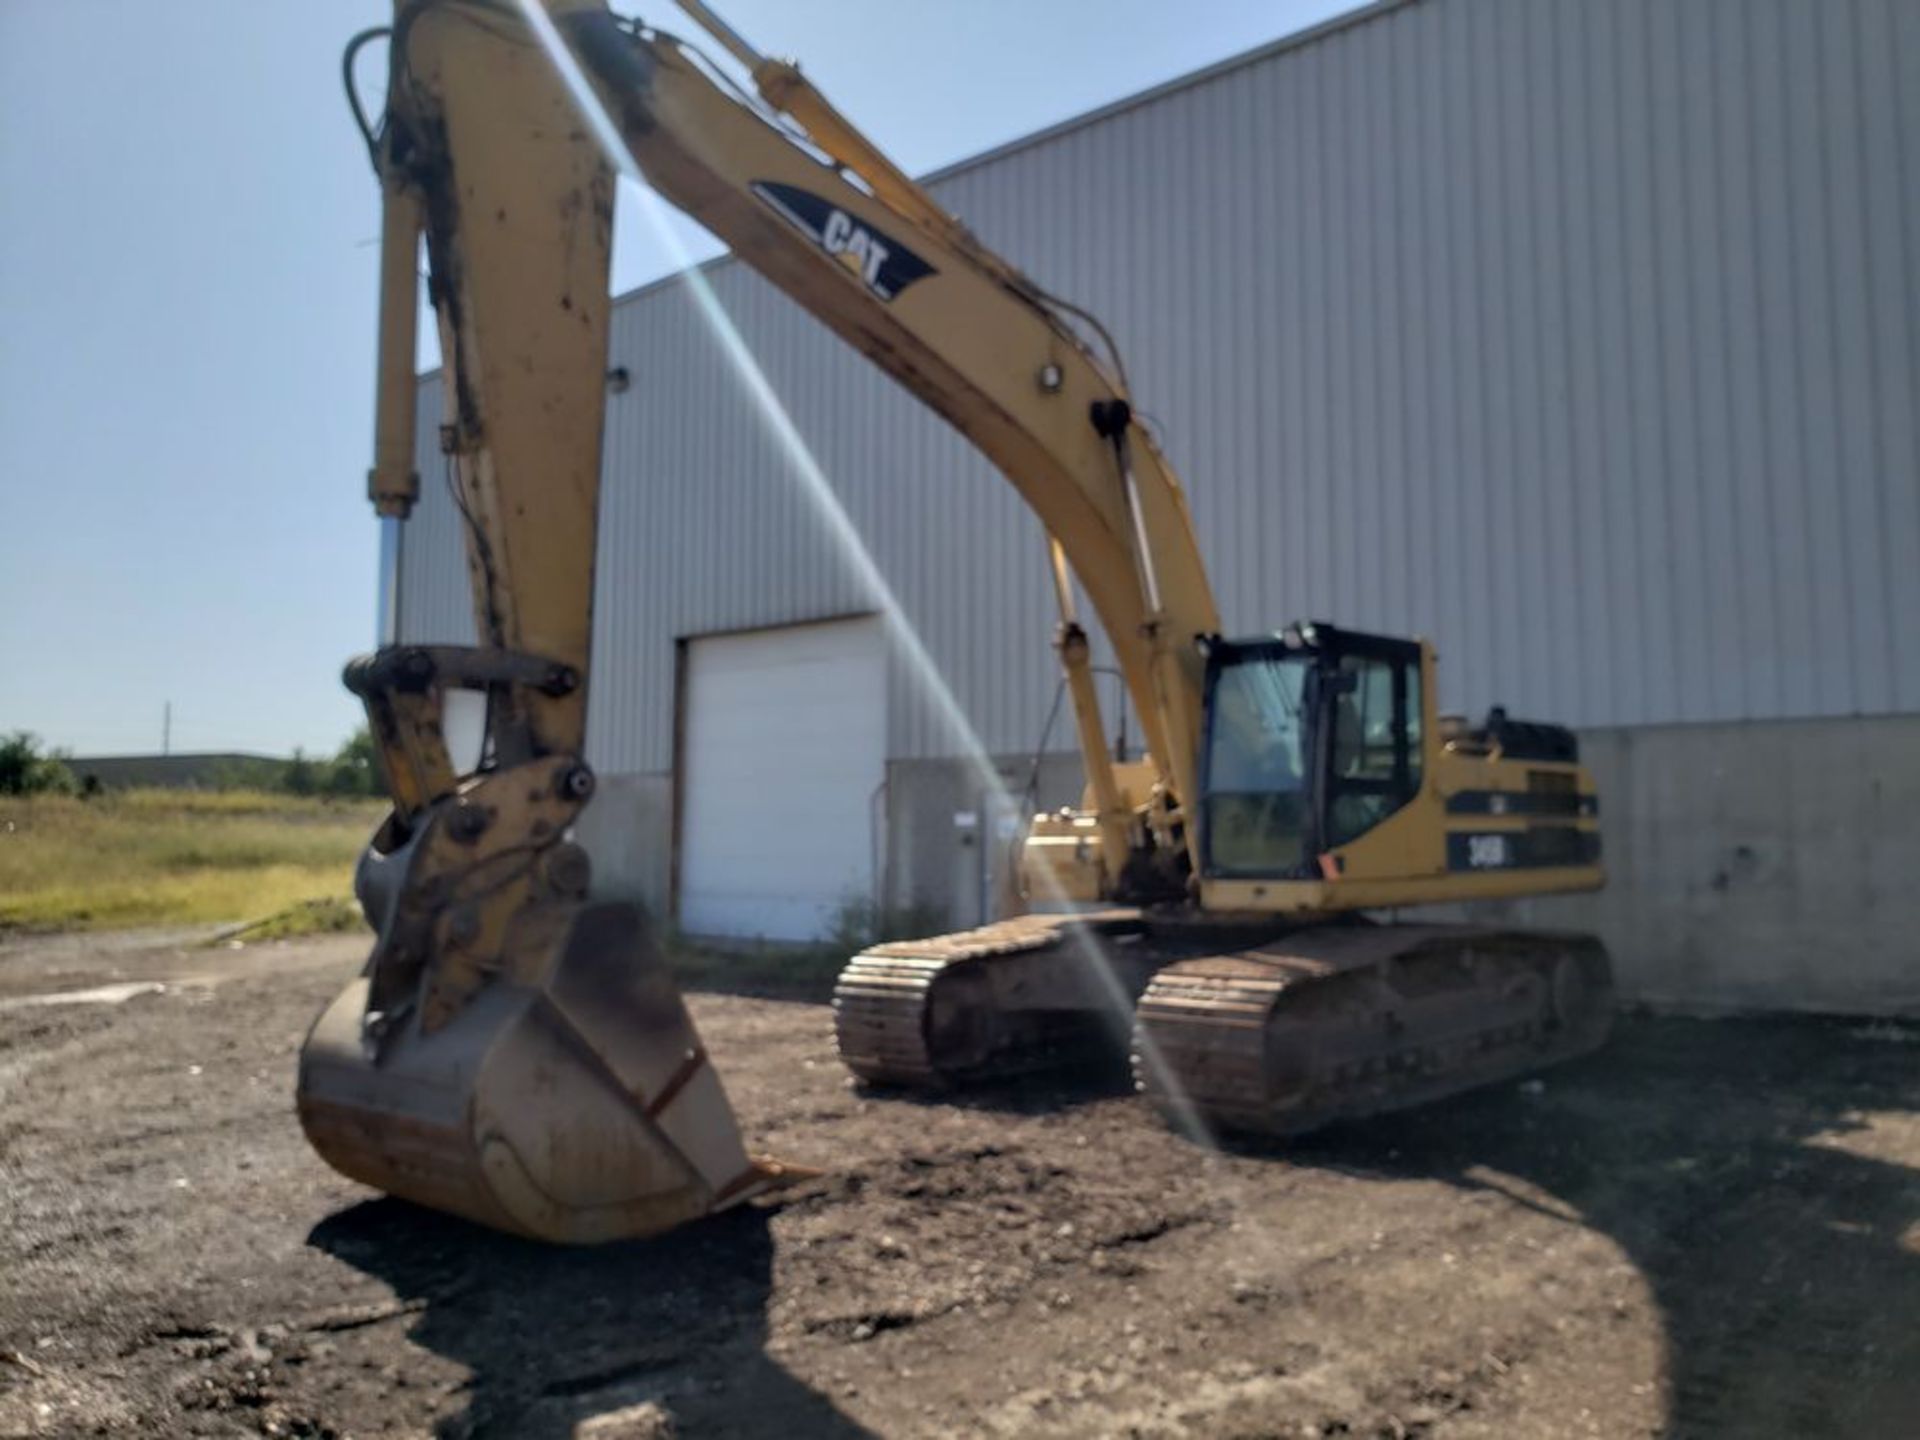 CATERPILLAR CAT EXCAVATOR MODEL-345BL SERIES II ID#CATO345BCAGS01653 (LOCATED AT: 29861 OLD HWY